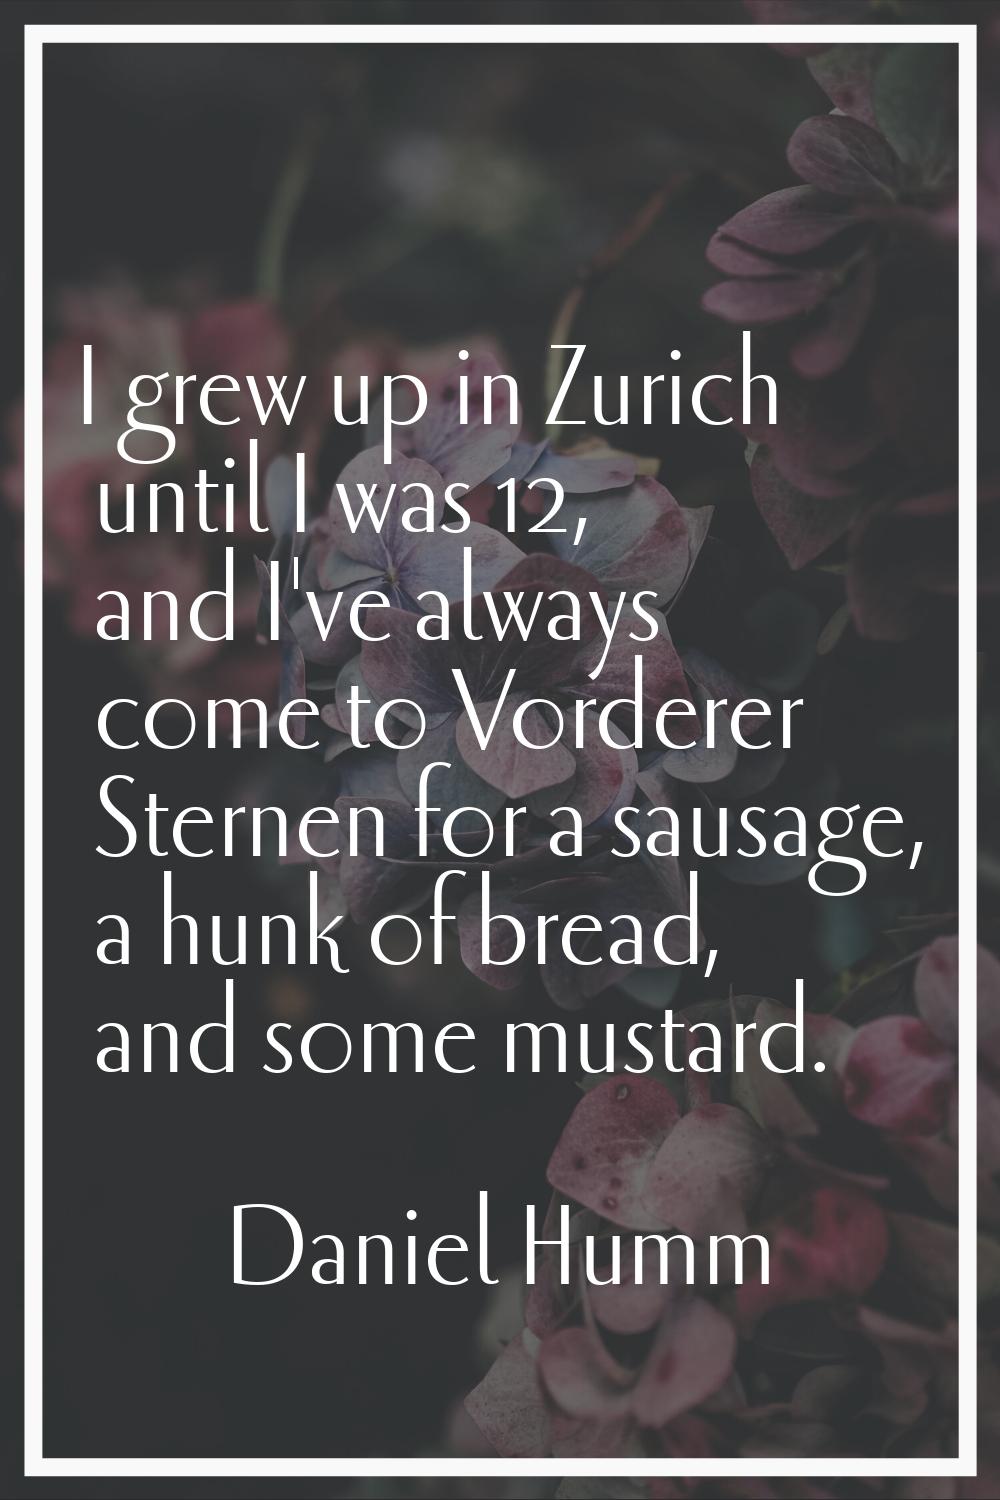 I grew up in Zurich until I was 12, and I've always come to Vorderer Sternen for a sausage, a hunk 